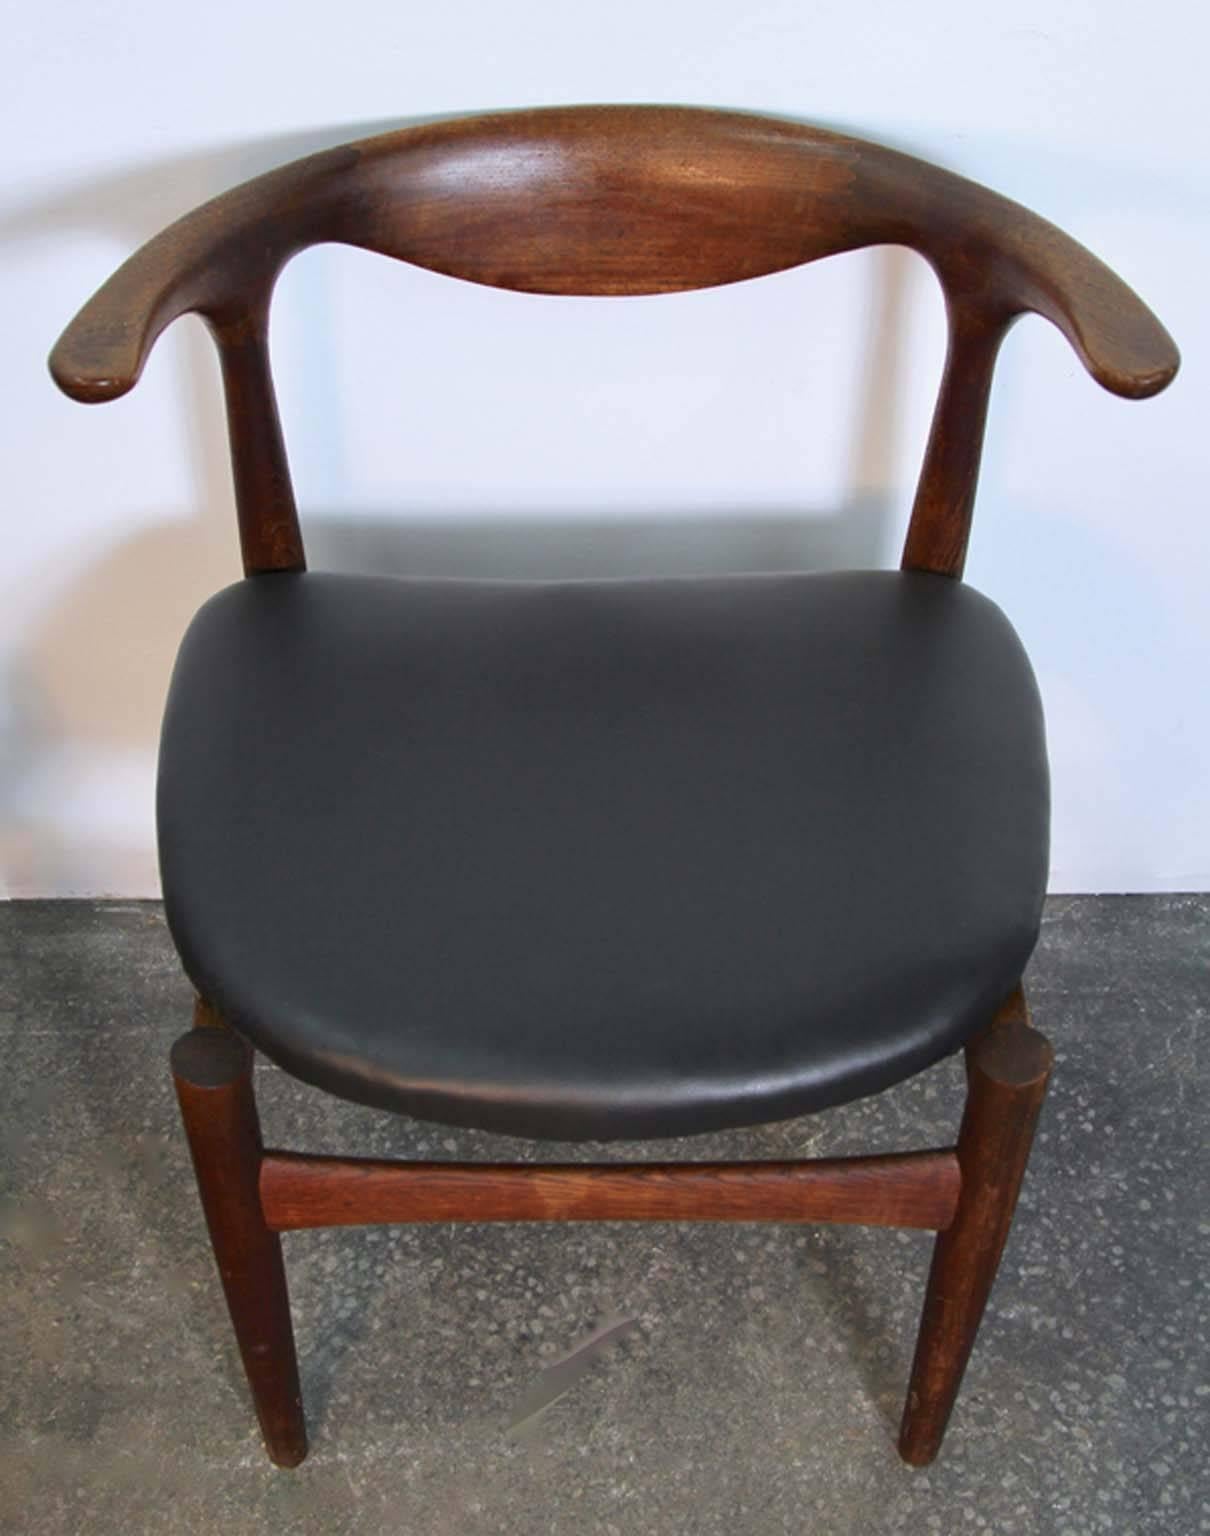 Pair of Danish Modern Teak and Leather Seat Chairs For Sale 1